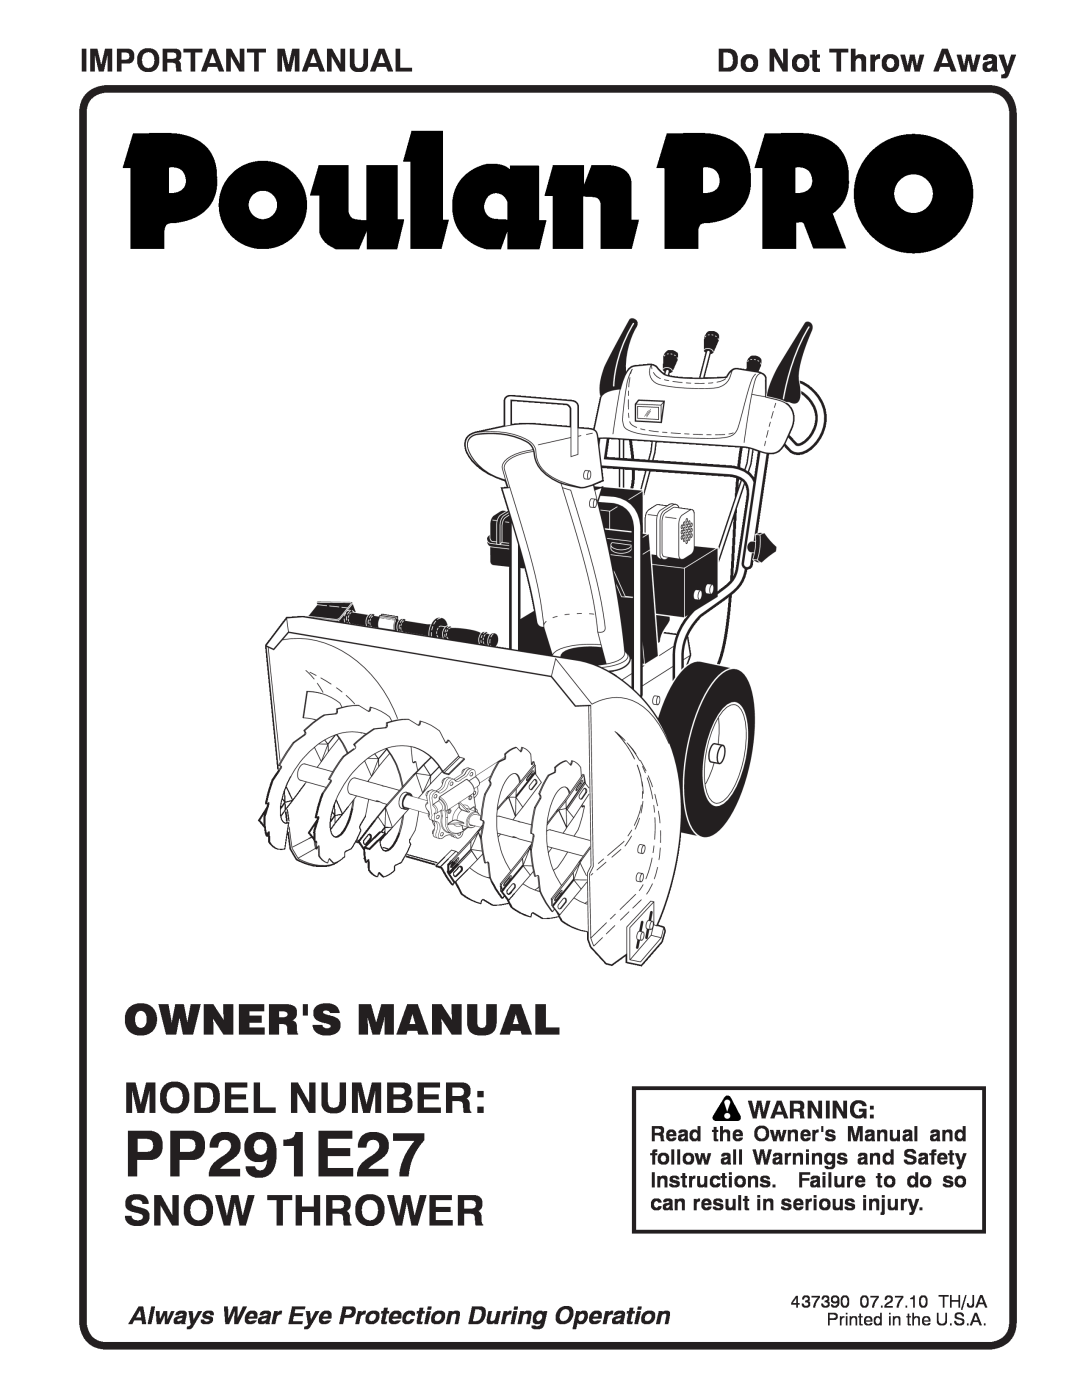 Poulan 96198003601, 437390 owner manual Snow Thrower, Important Manual, PP291E27, Do Not Throw Away 